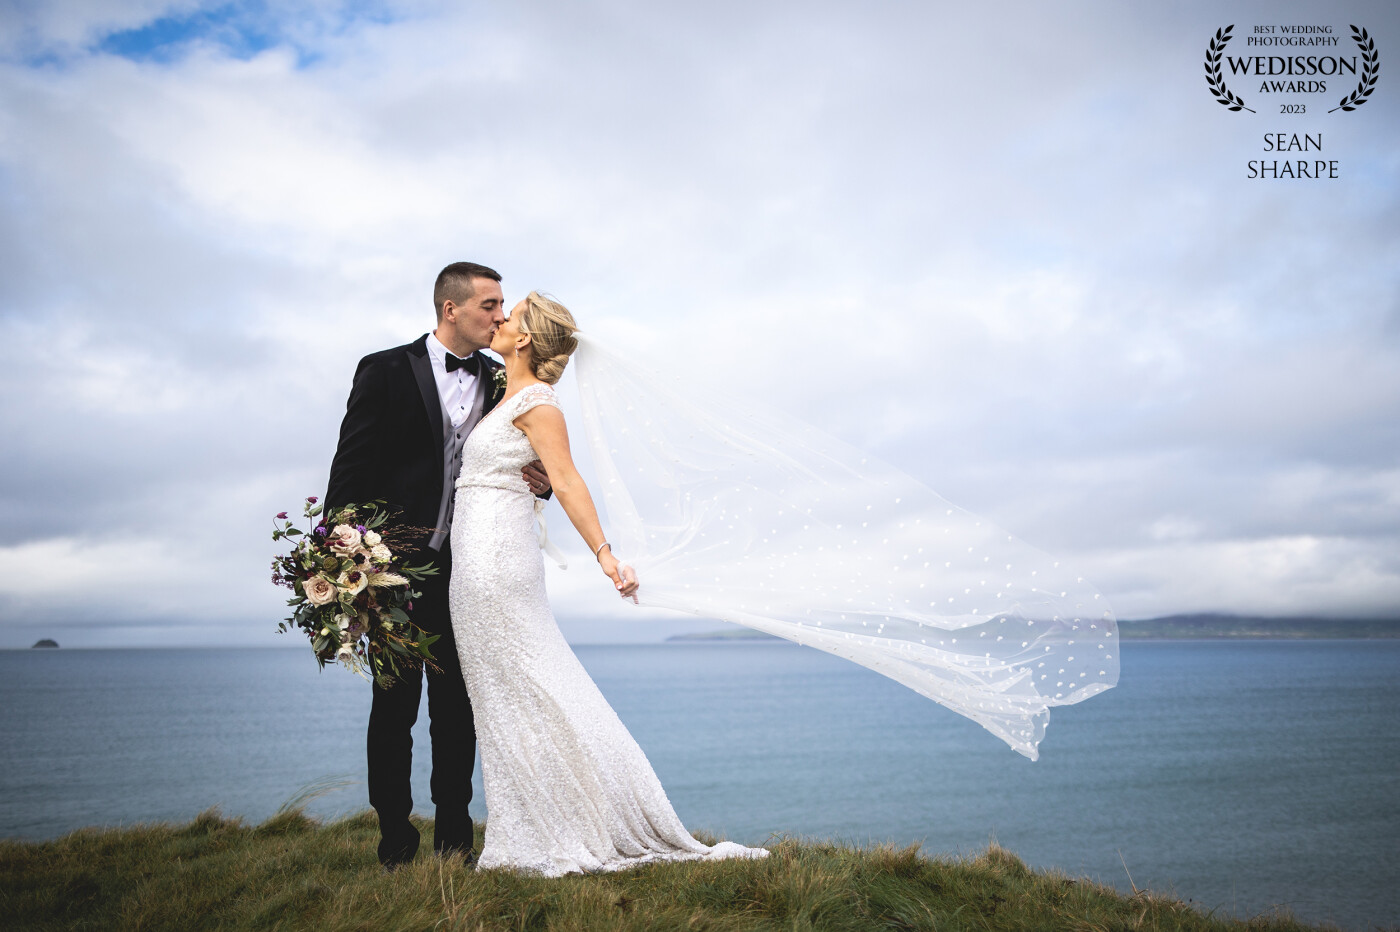 Nicola and Ben at the cliffs at Warren Beach, Co. Kerry. What a beautiful place for a shoot! These two were just fantastic in front of the camera!